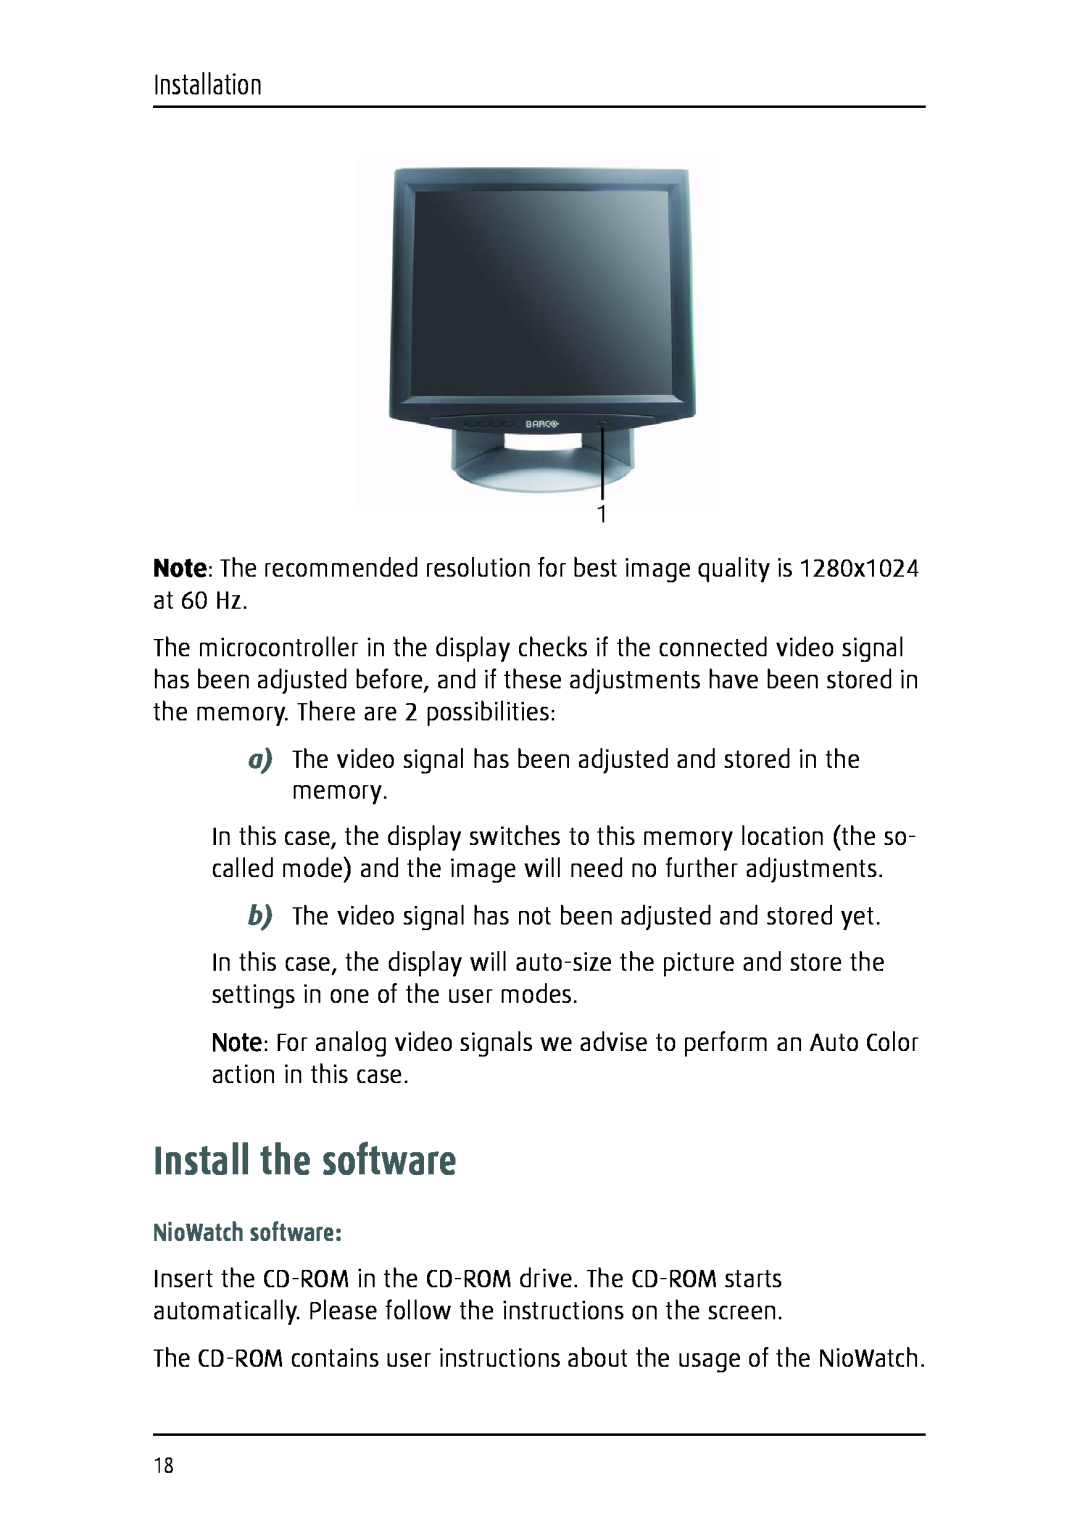 Barco 1219 user manual Install the software, NioWatch software, Installation 